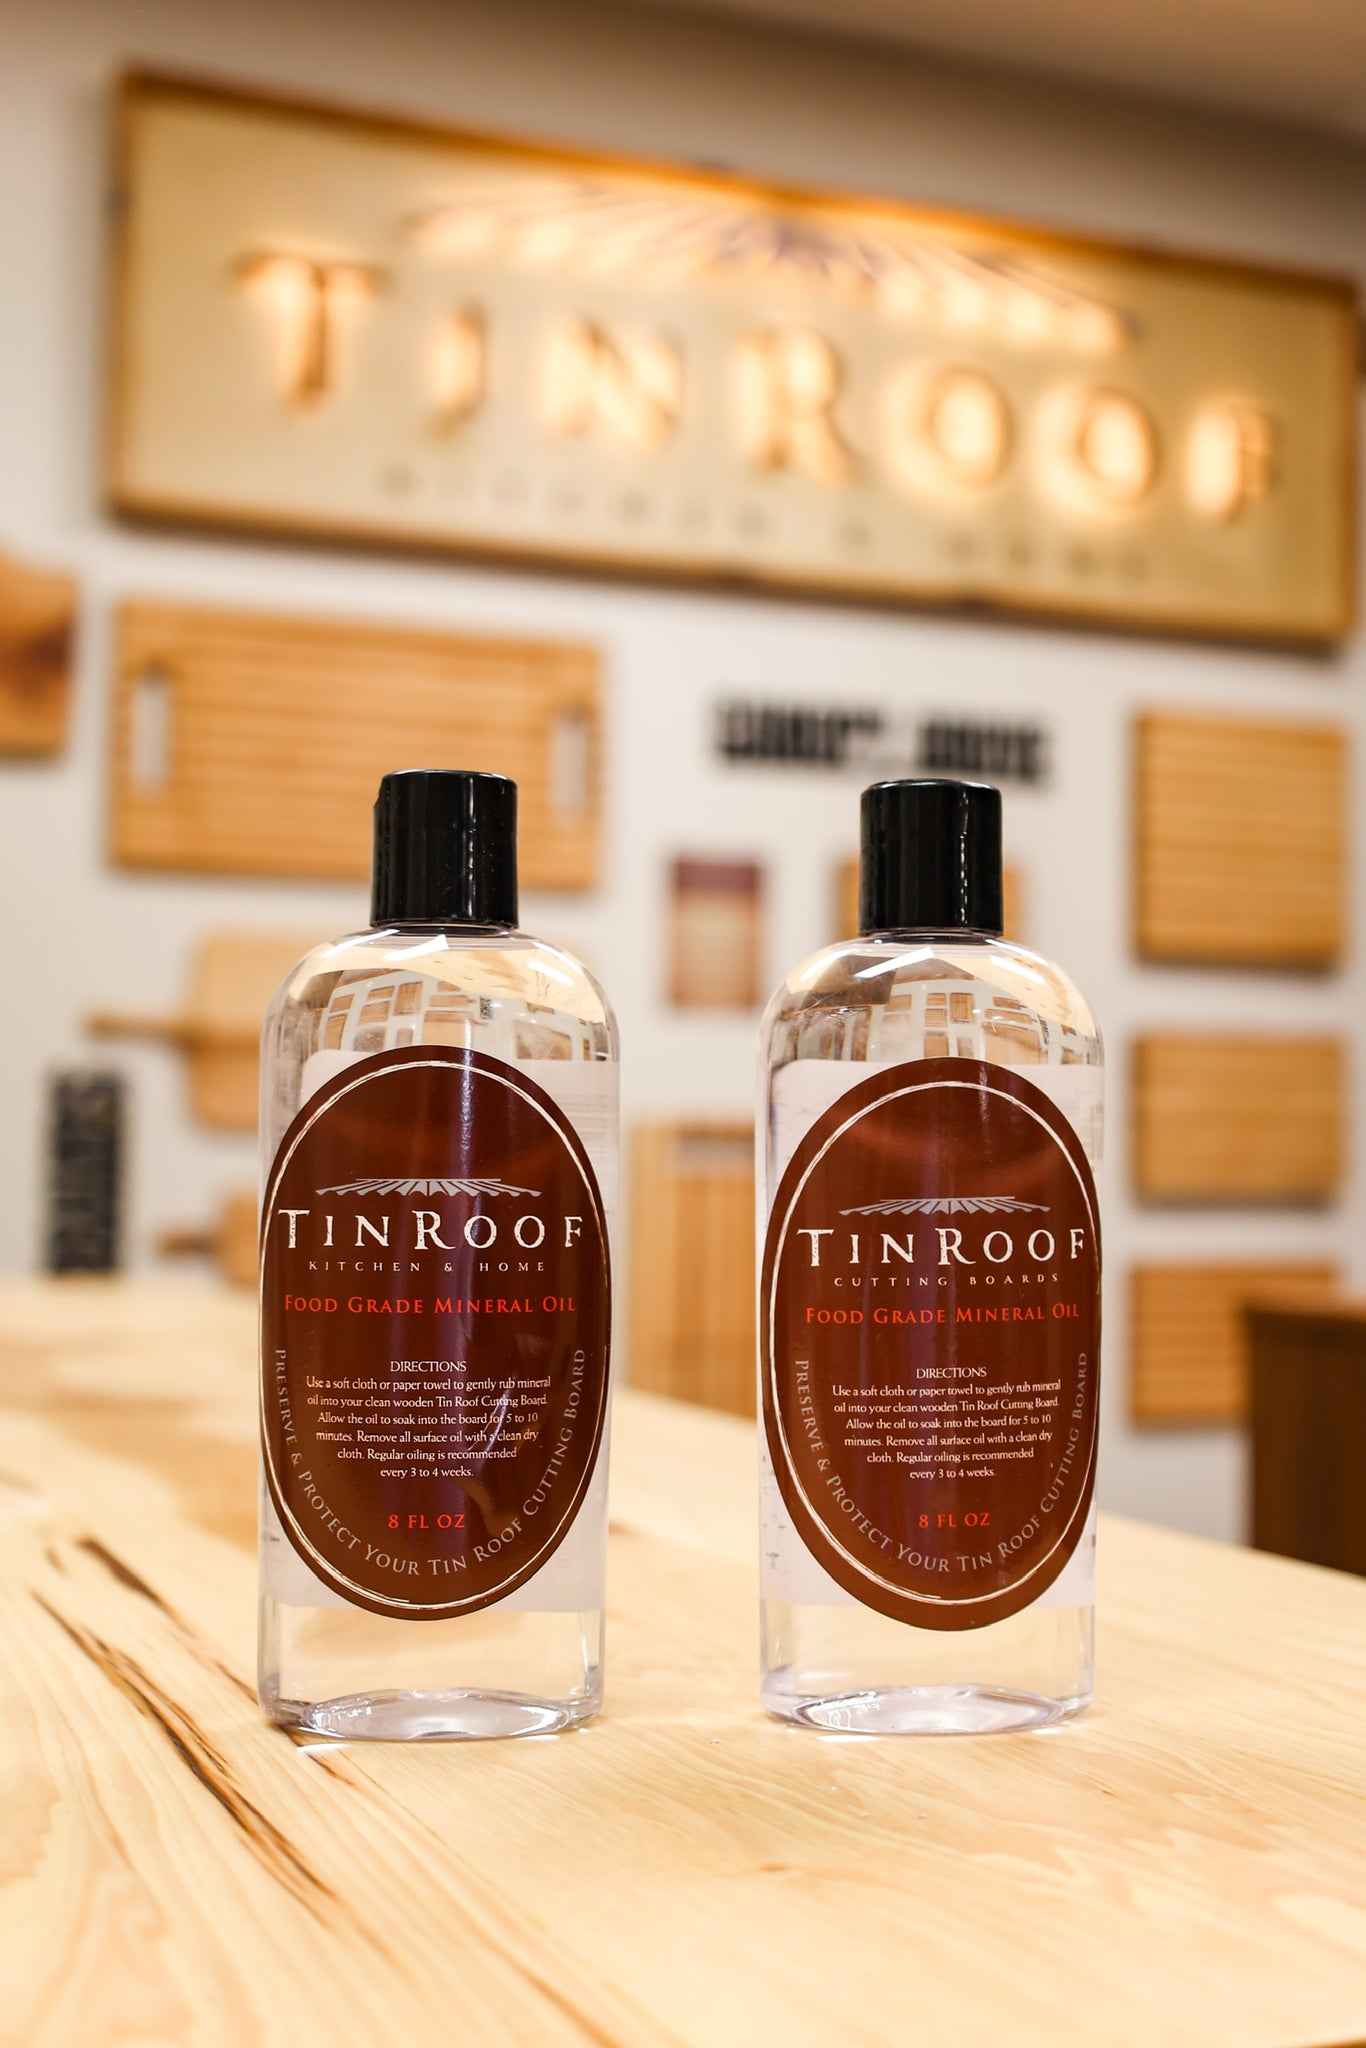 Tin Roof Food Grade Mineral Oil